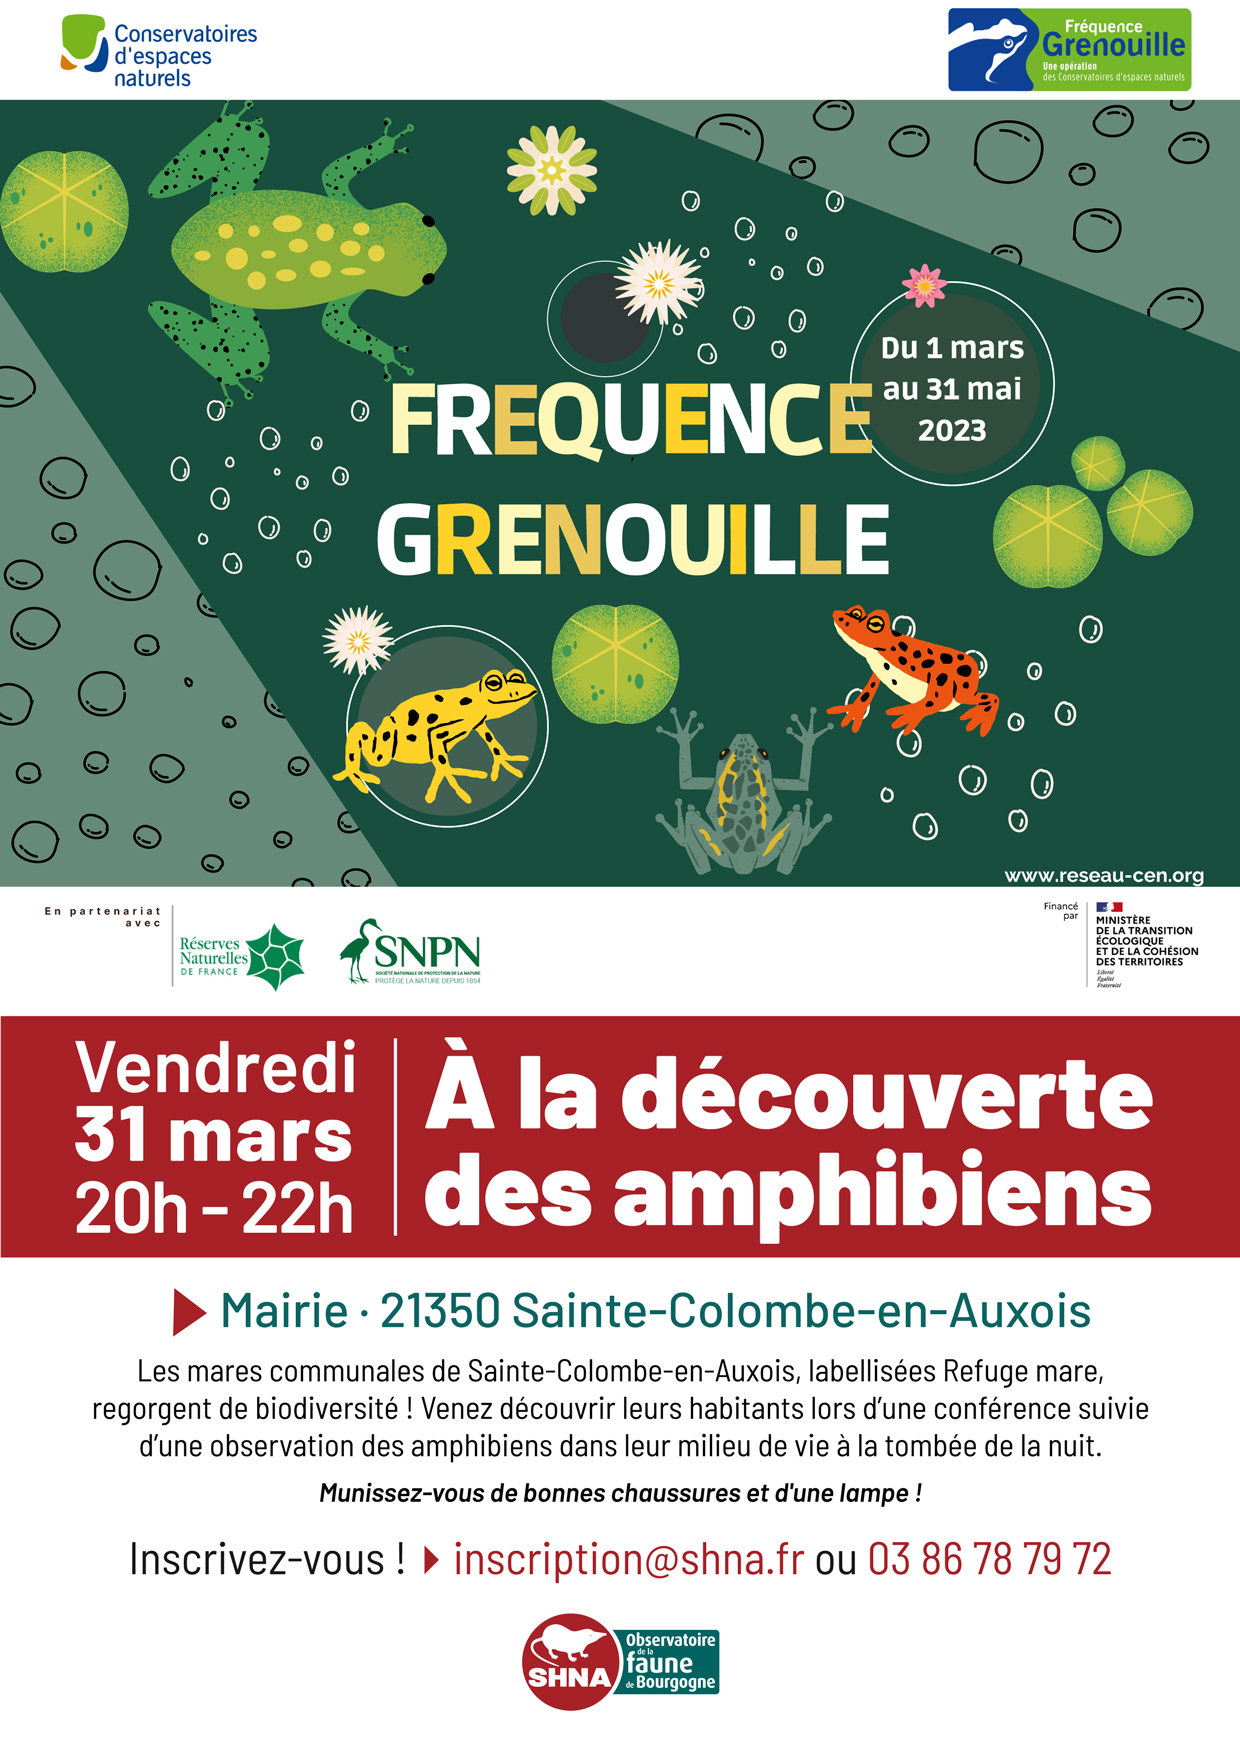 Fréquence Grenouille 2023